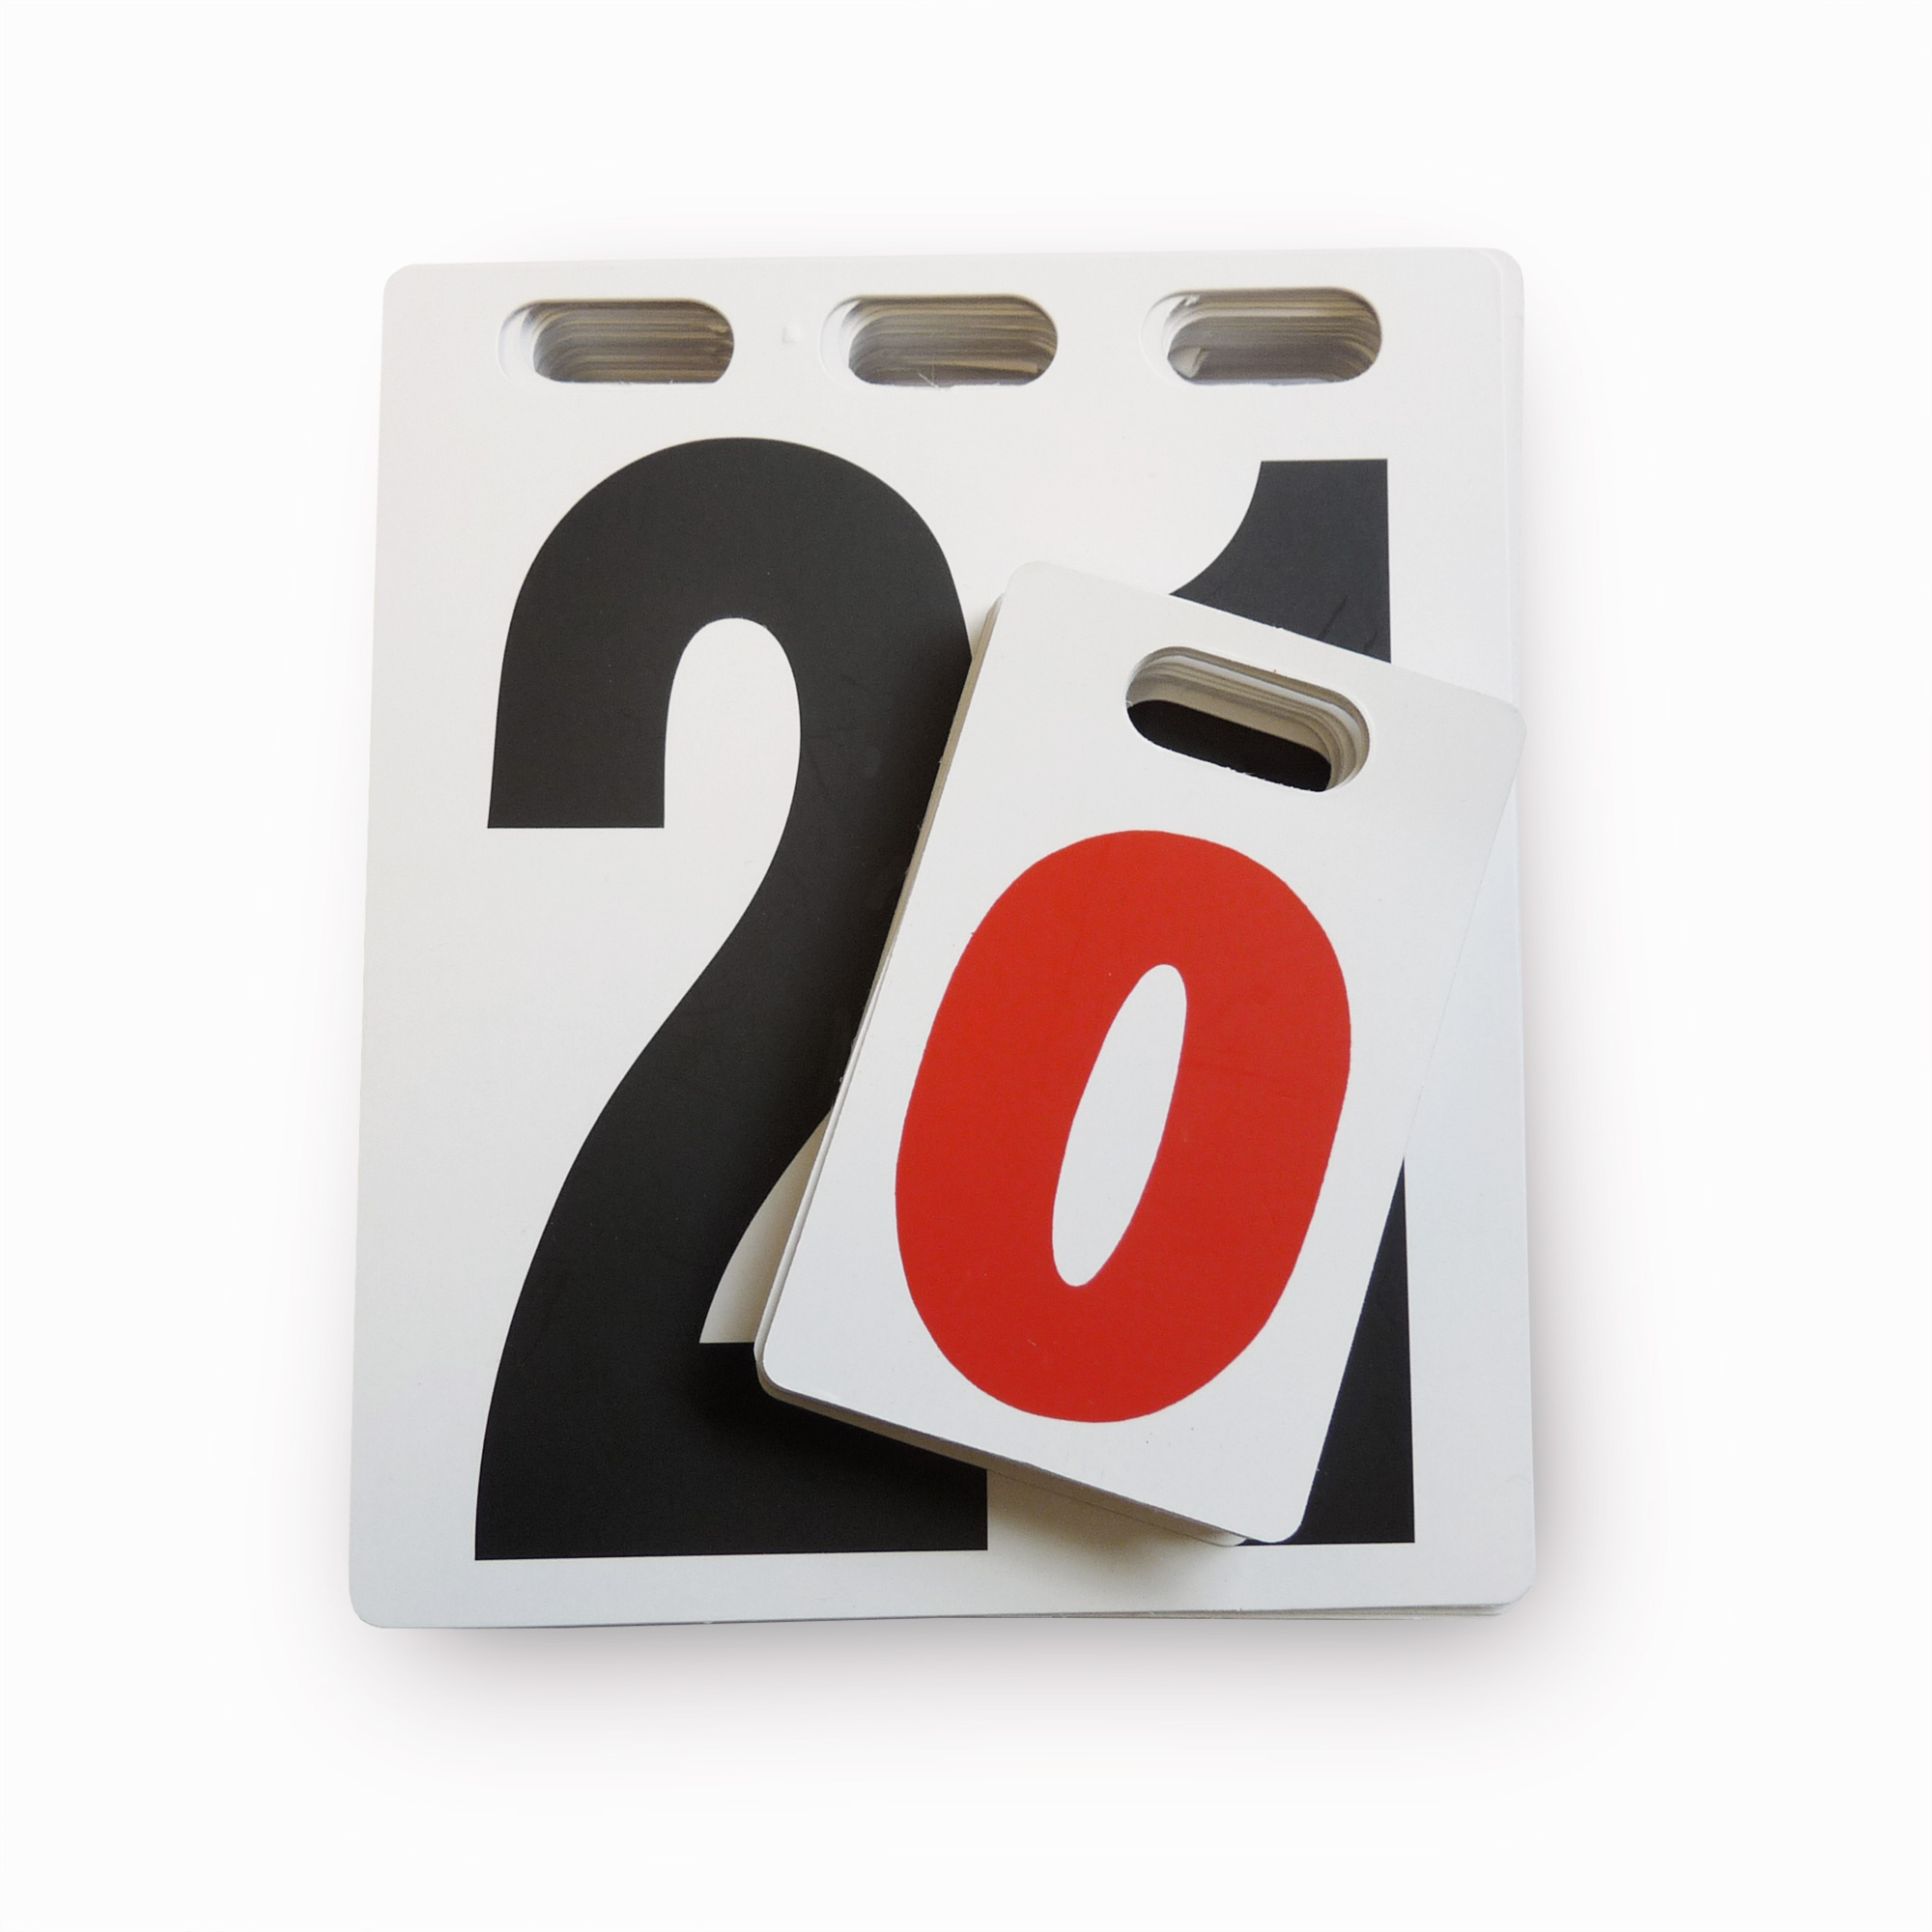 Universal replacement numbers 0-21 white